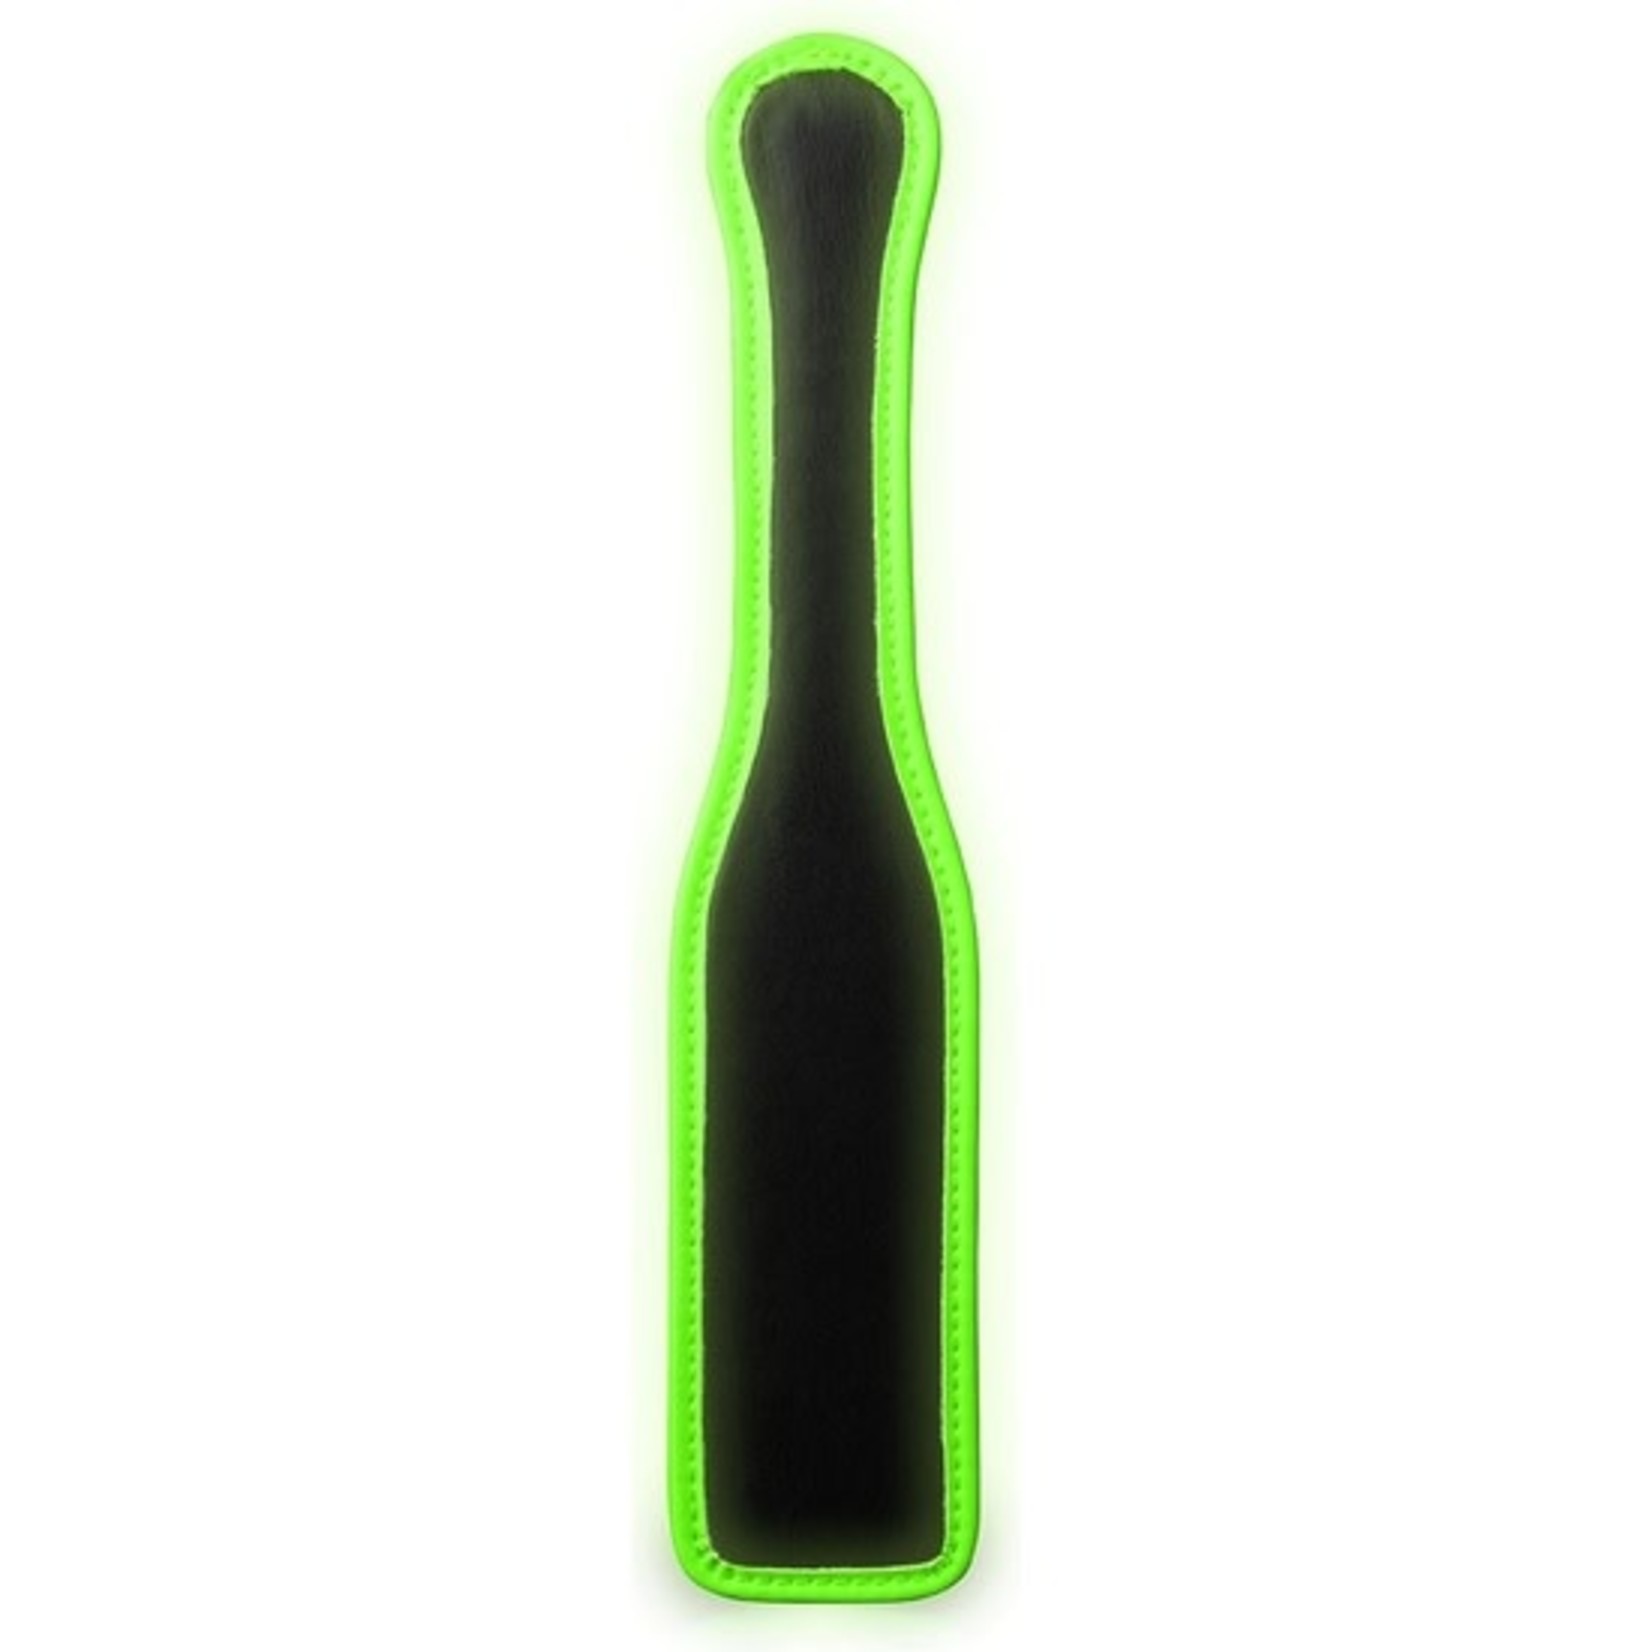 OUCH OUCH! GLOW IN THE DARK PADDLE